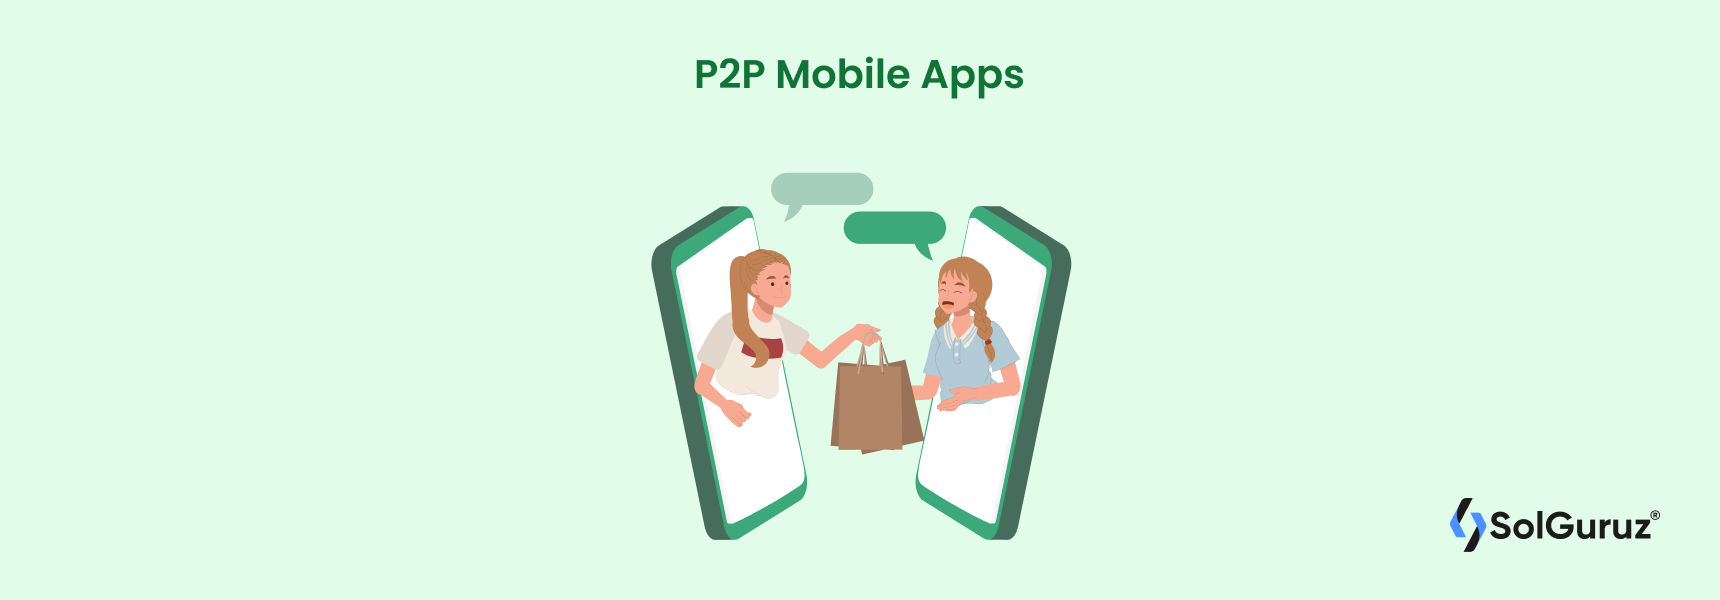 P2P Mobile Apps is one of the android app development trends